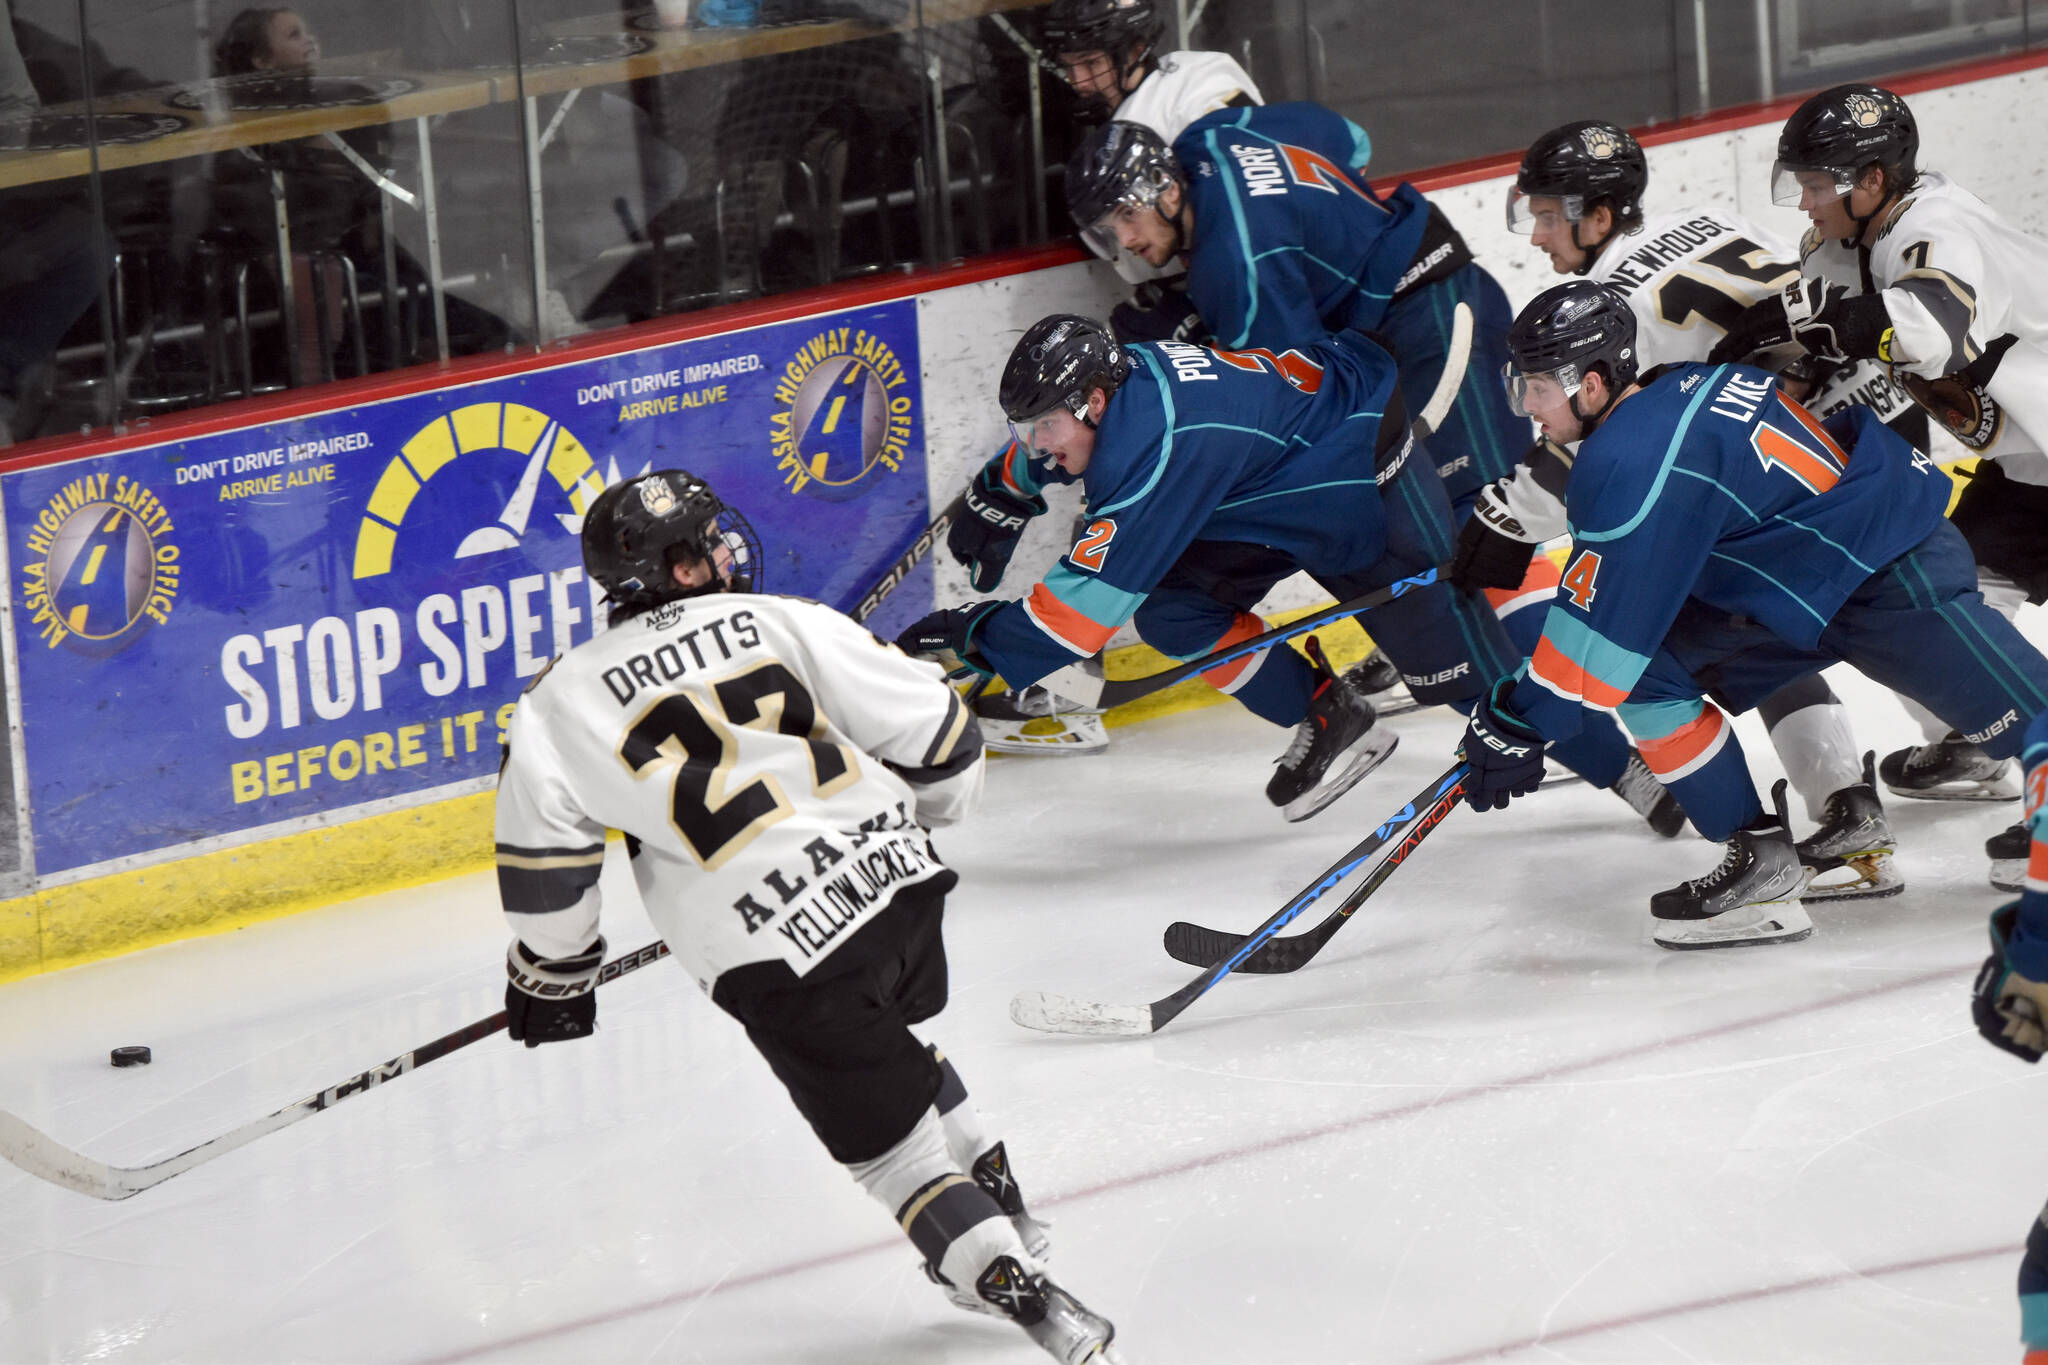 The Kenai River Brown Bears and Anchorage Wolverines battle for the puck Saturday, Nov. 19, 2022, at the Soldotna Regional Sports Complex. (Photo by Jeff Helminiak/Peninsula Clarion)